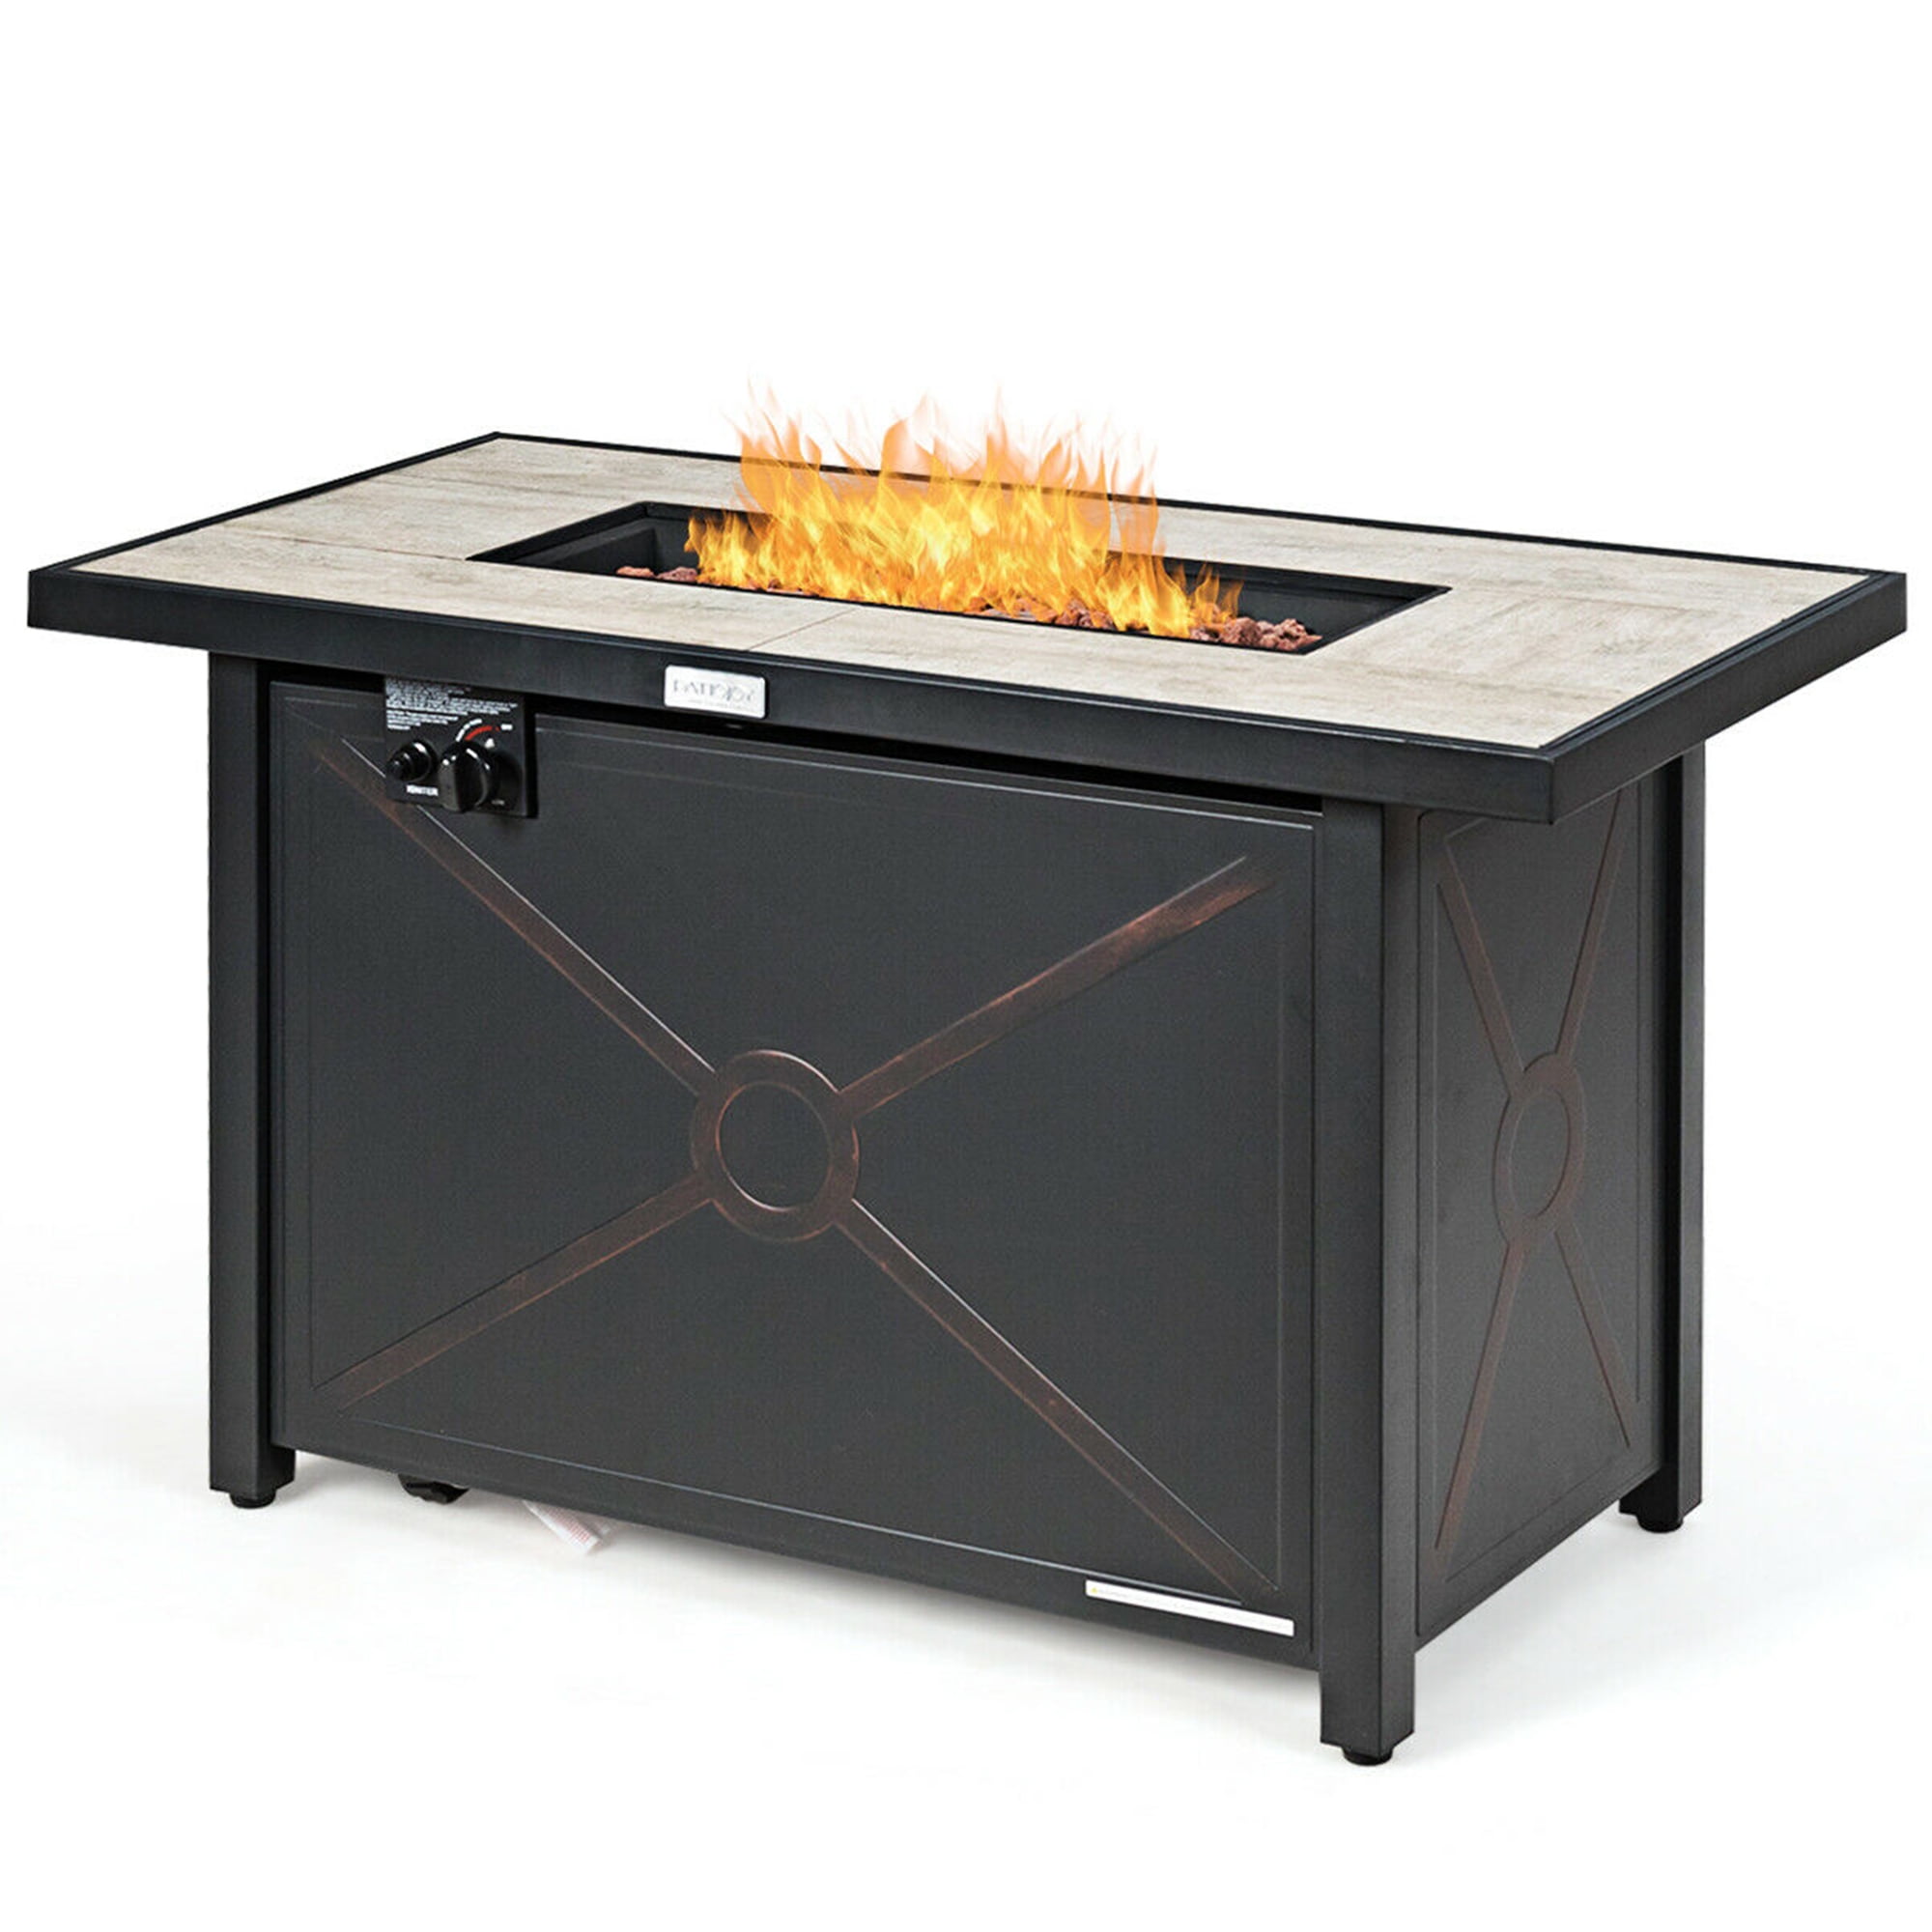 Gymax 42 Rectangular Propane Gas Fire, Do Propane Fire Pits Need To Be Covered